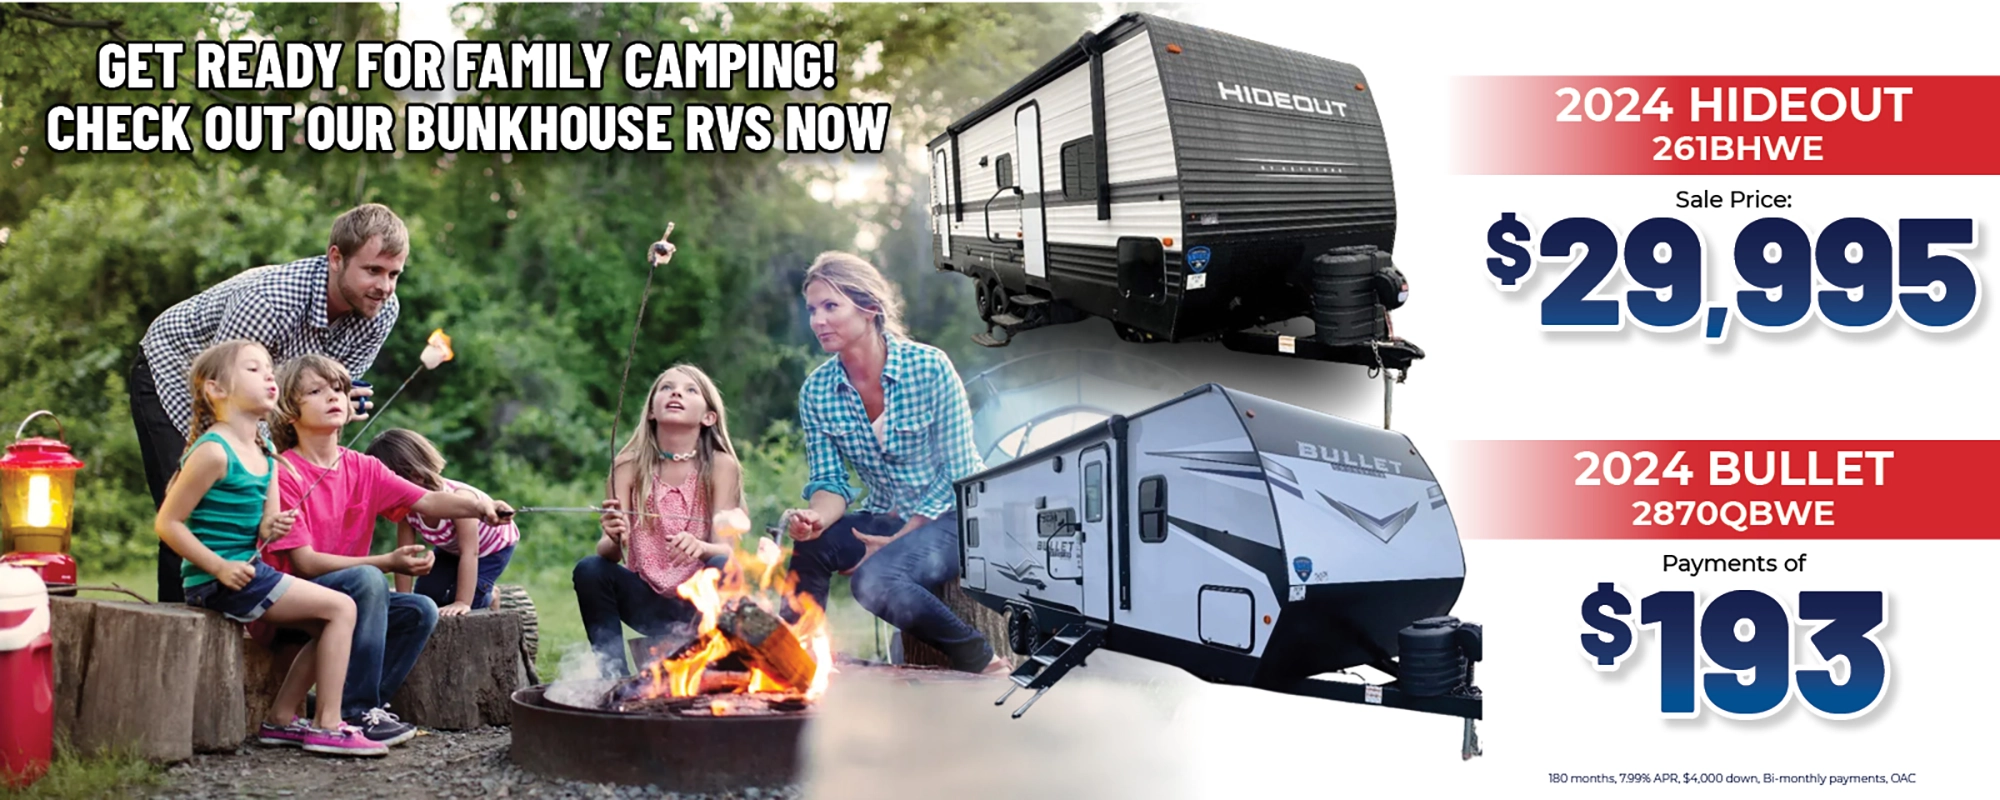 Get ready for family camping. Check out our bunkhouse RVs now.